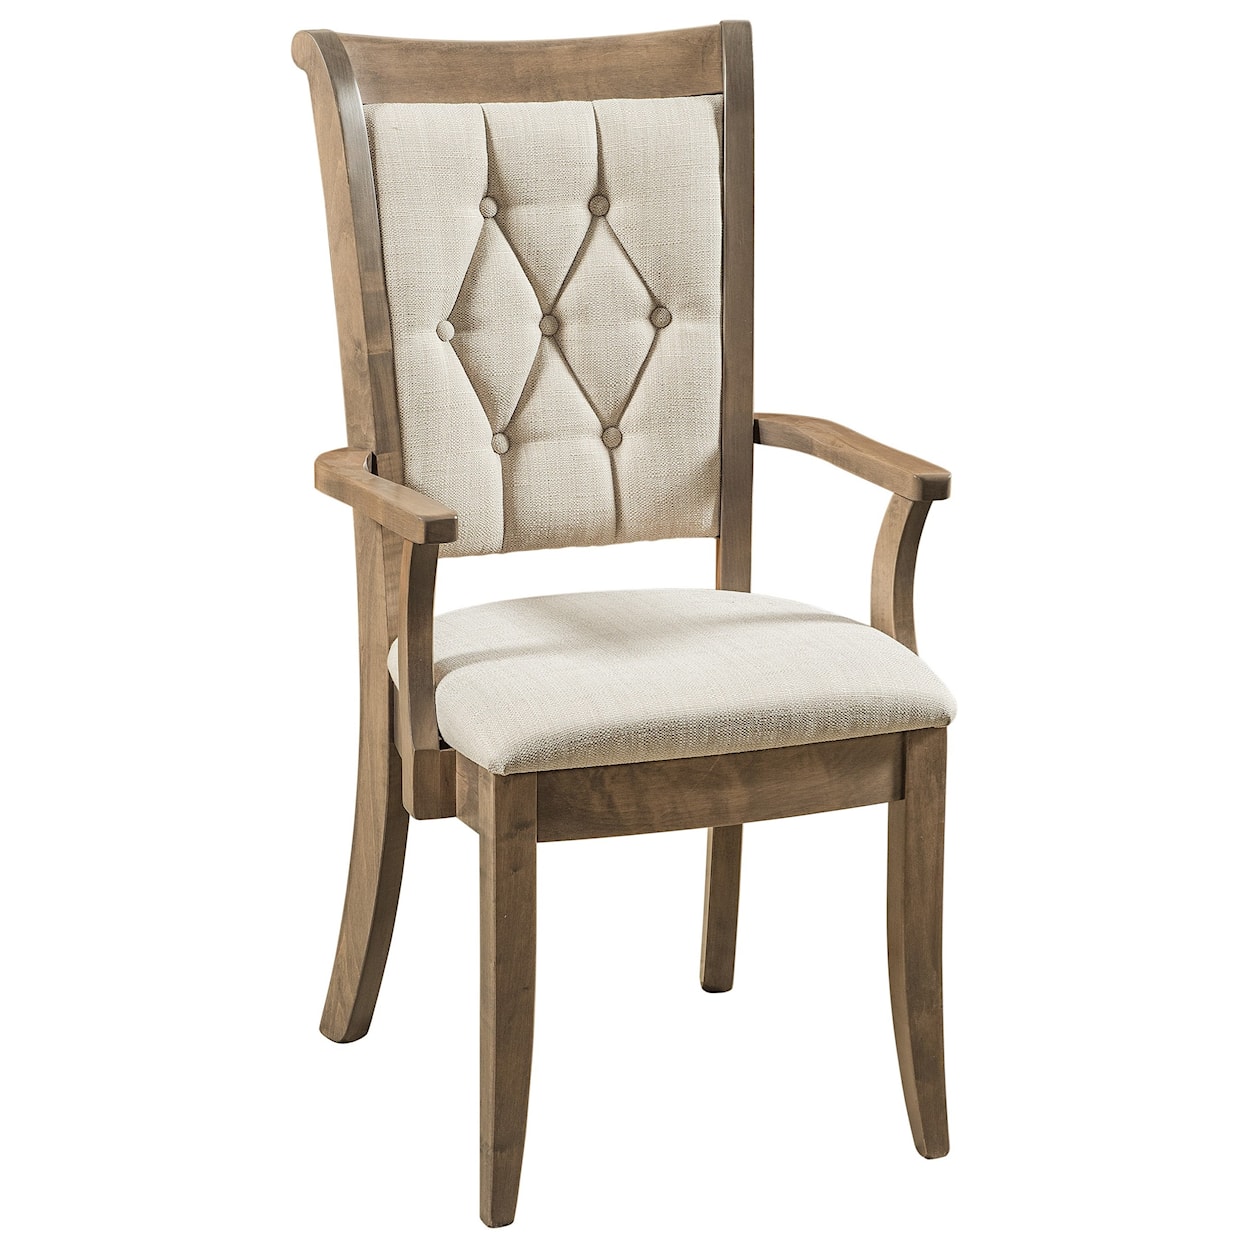 F&N Woodworking Chelsea Arm Chair - Leather Seat